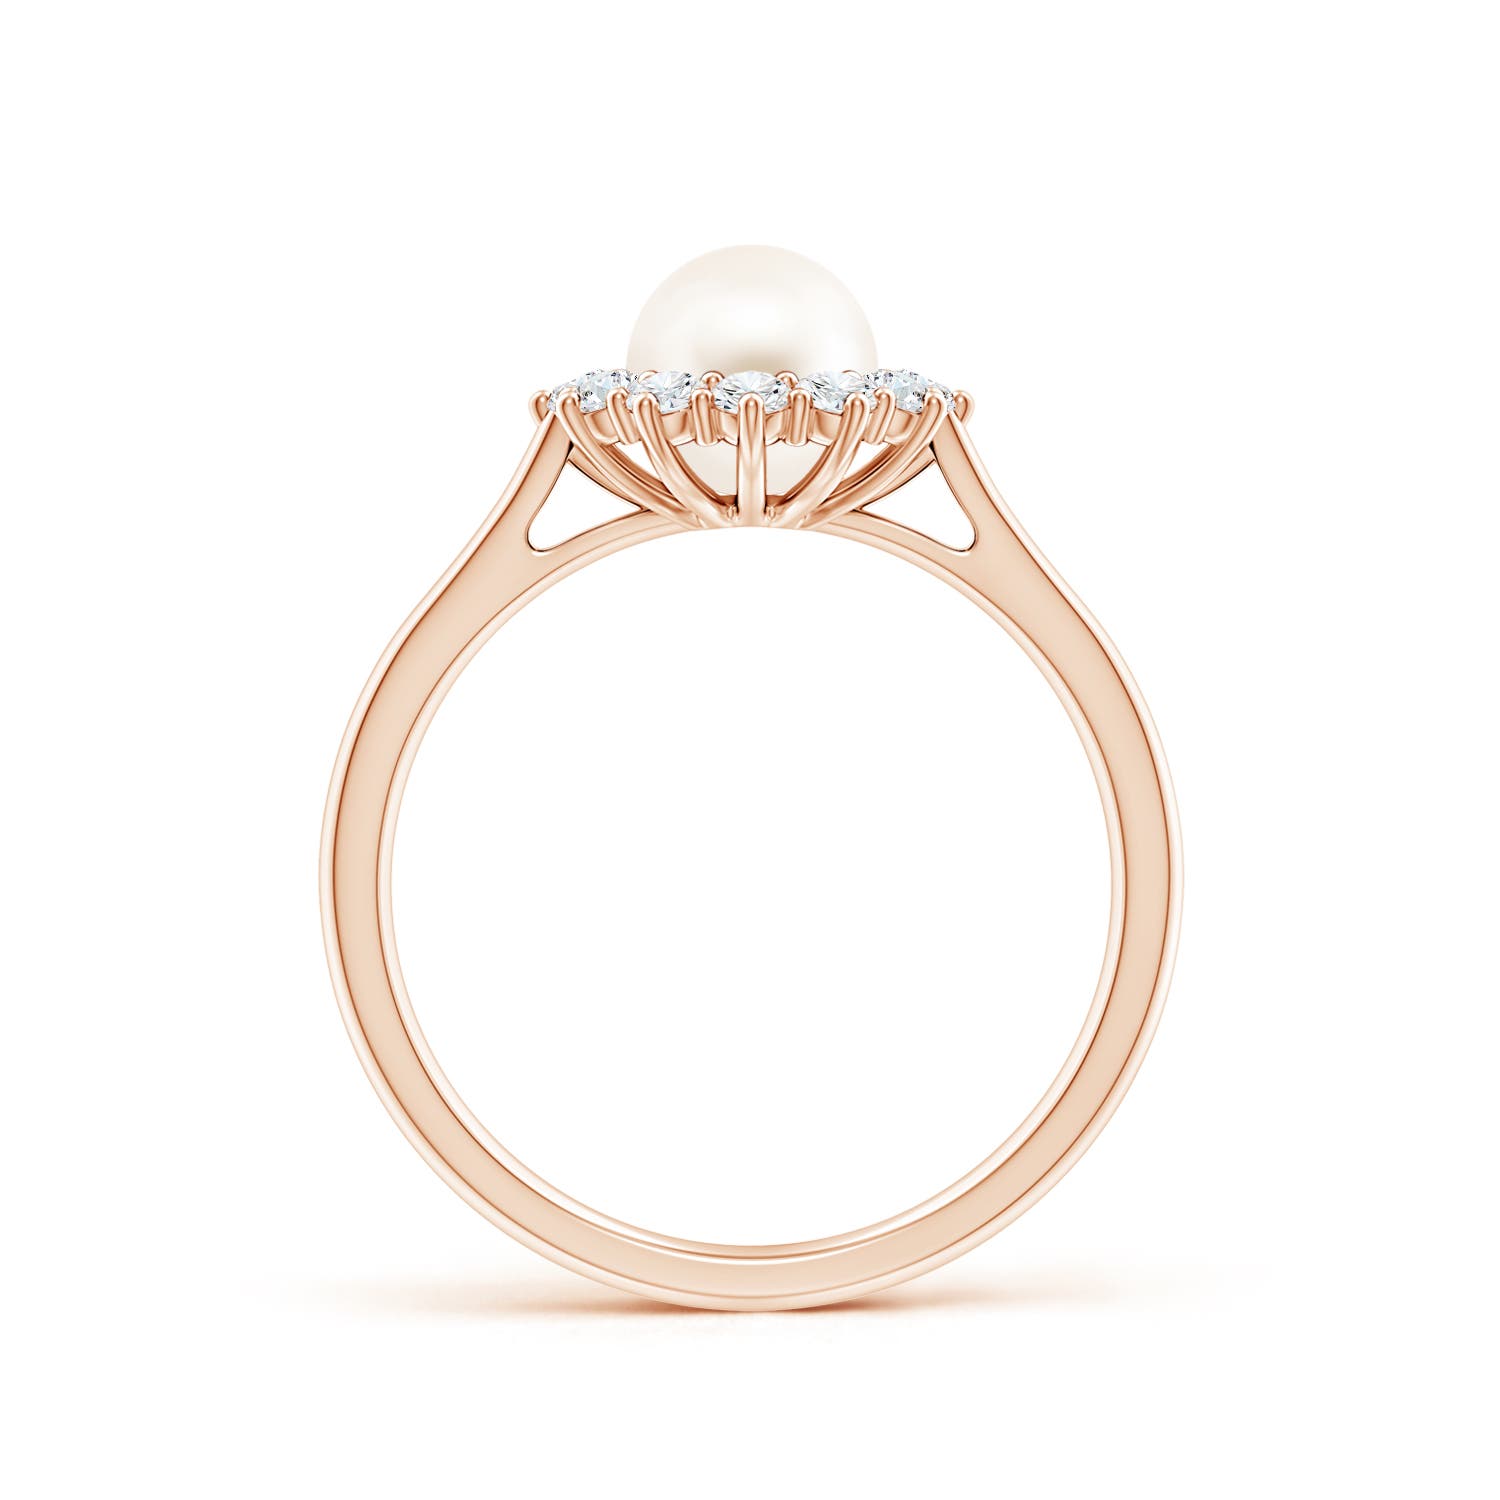 AAA / 1.88 CT / 14 KT Rose Gold